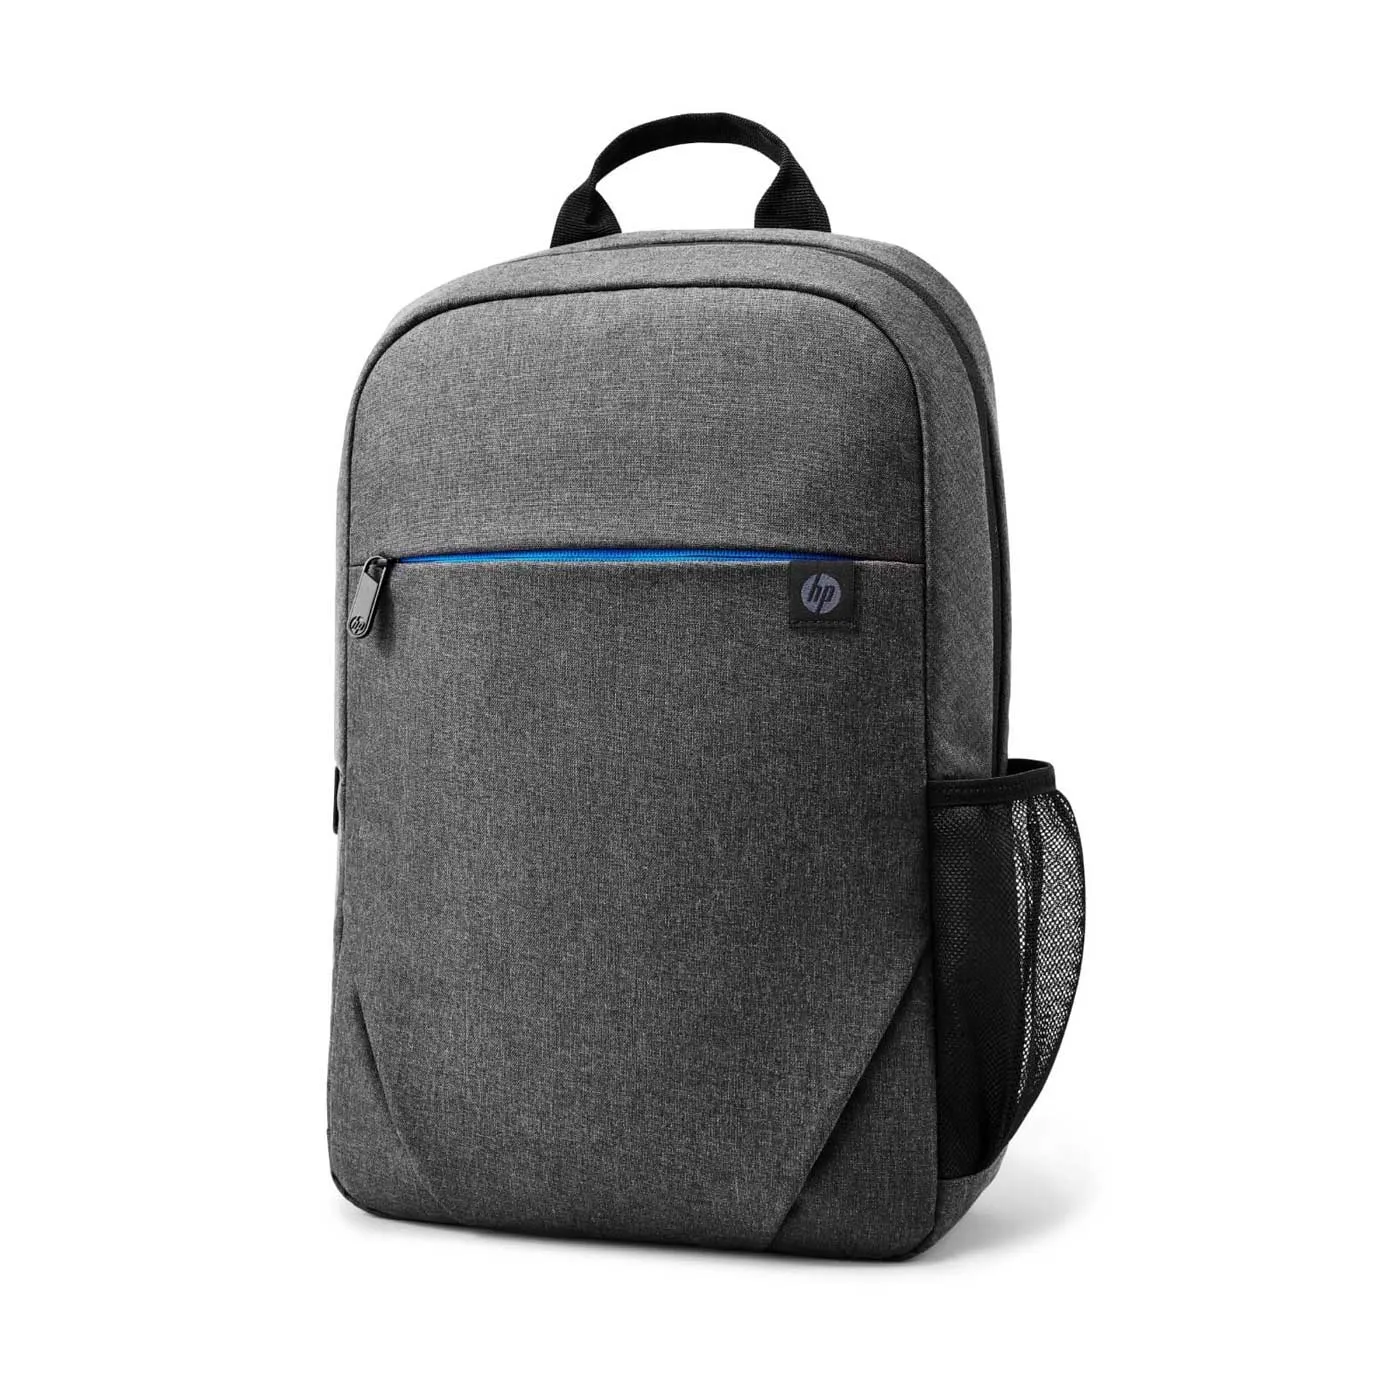 Morral HP Prelude 15" Gris